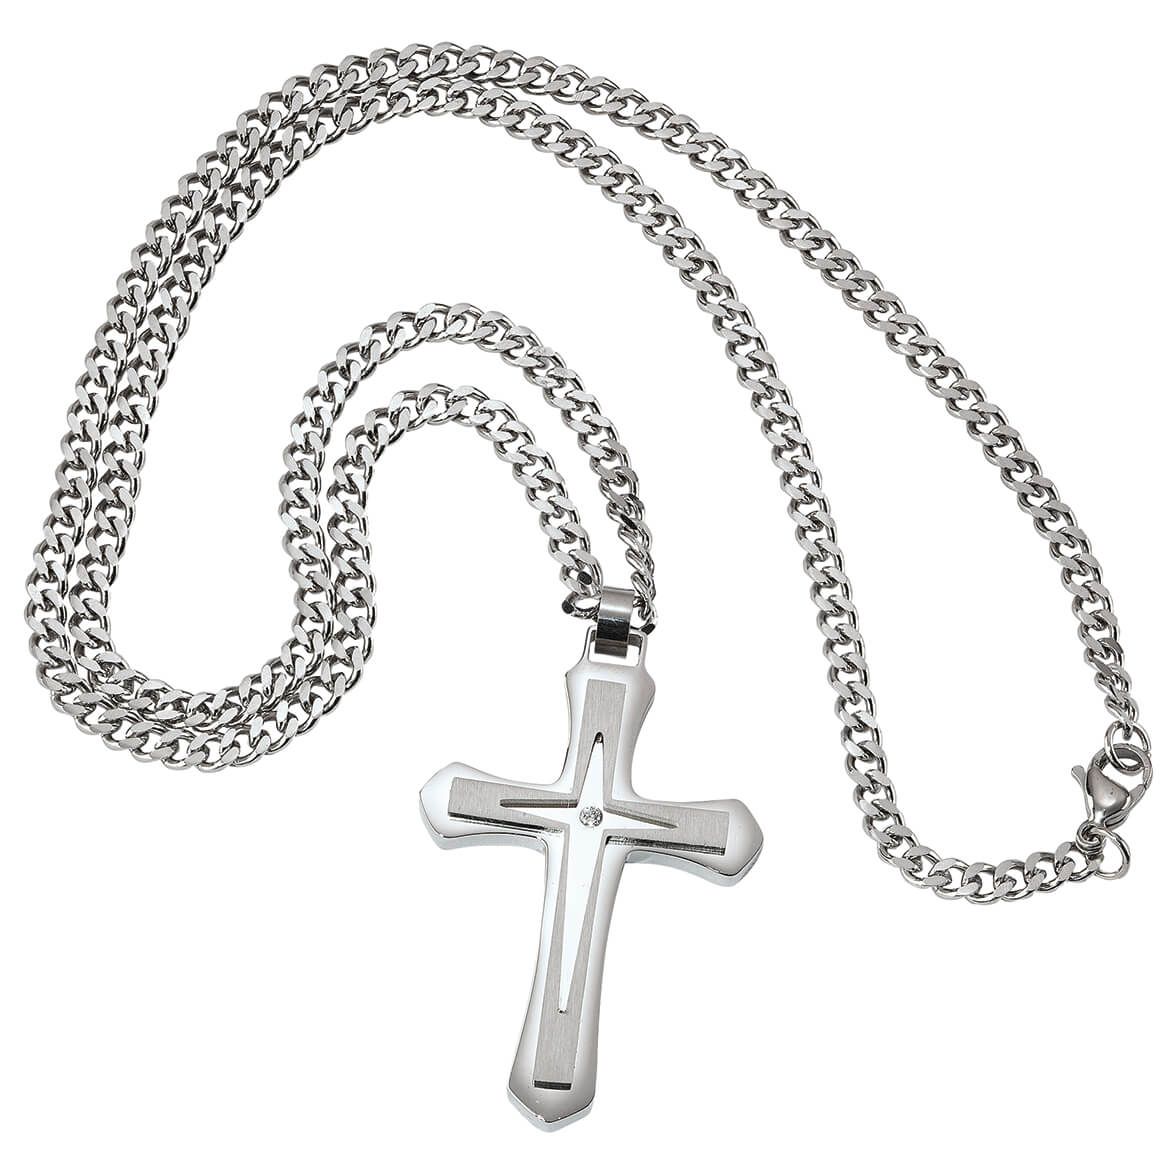 Personalized Stainless Steel/CZ Cross Necklace + '-' + 374246